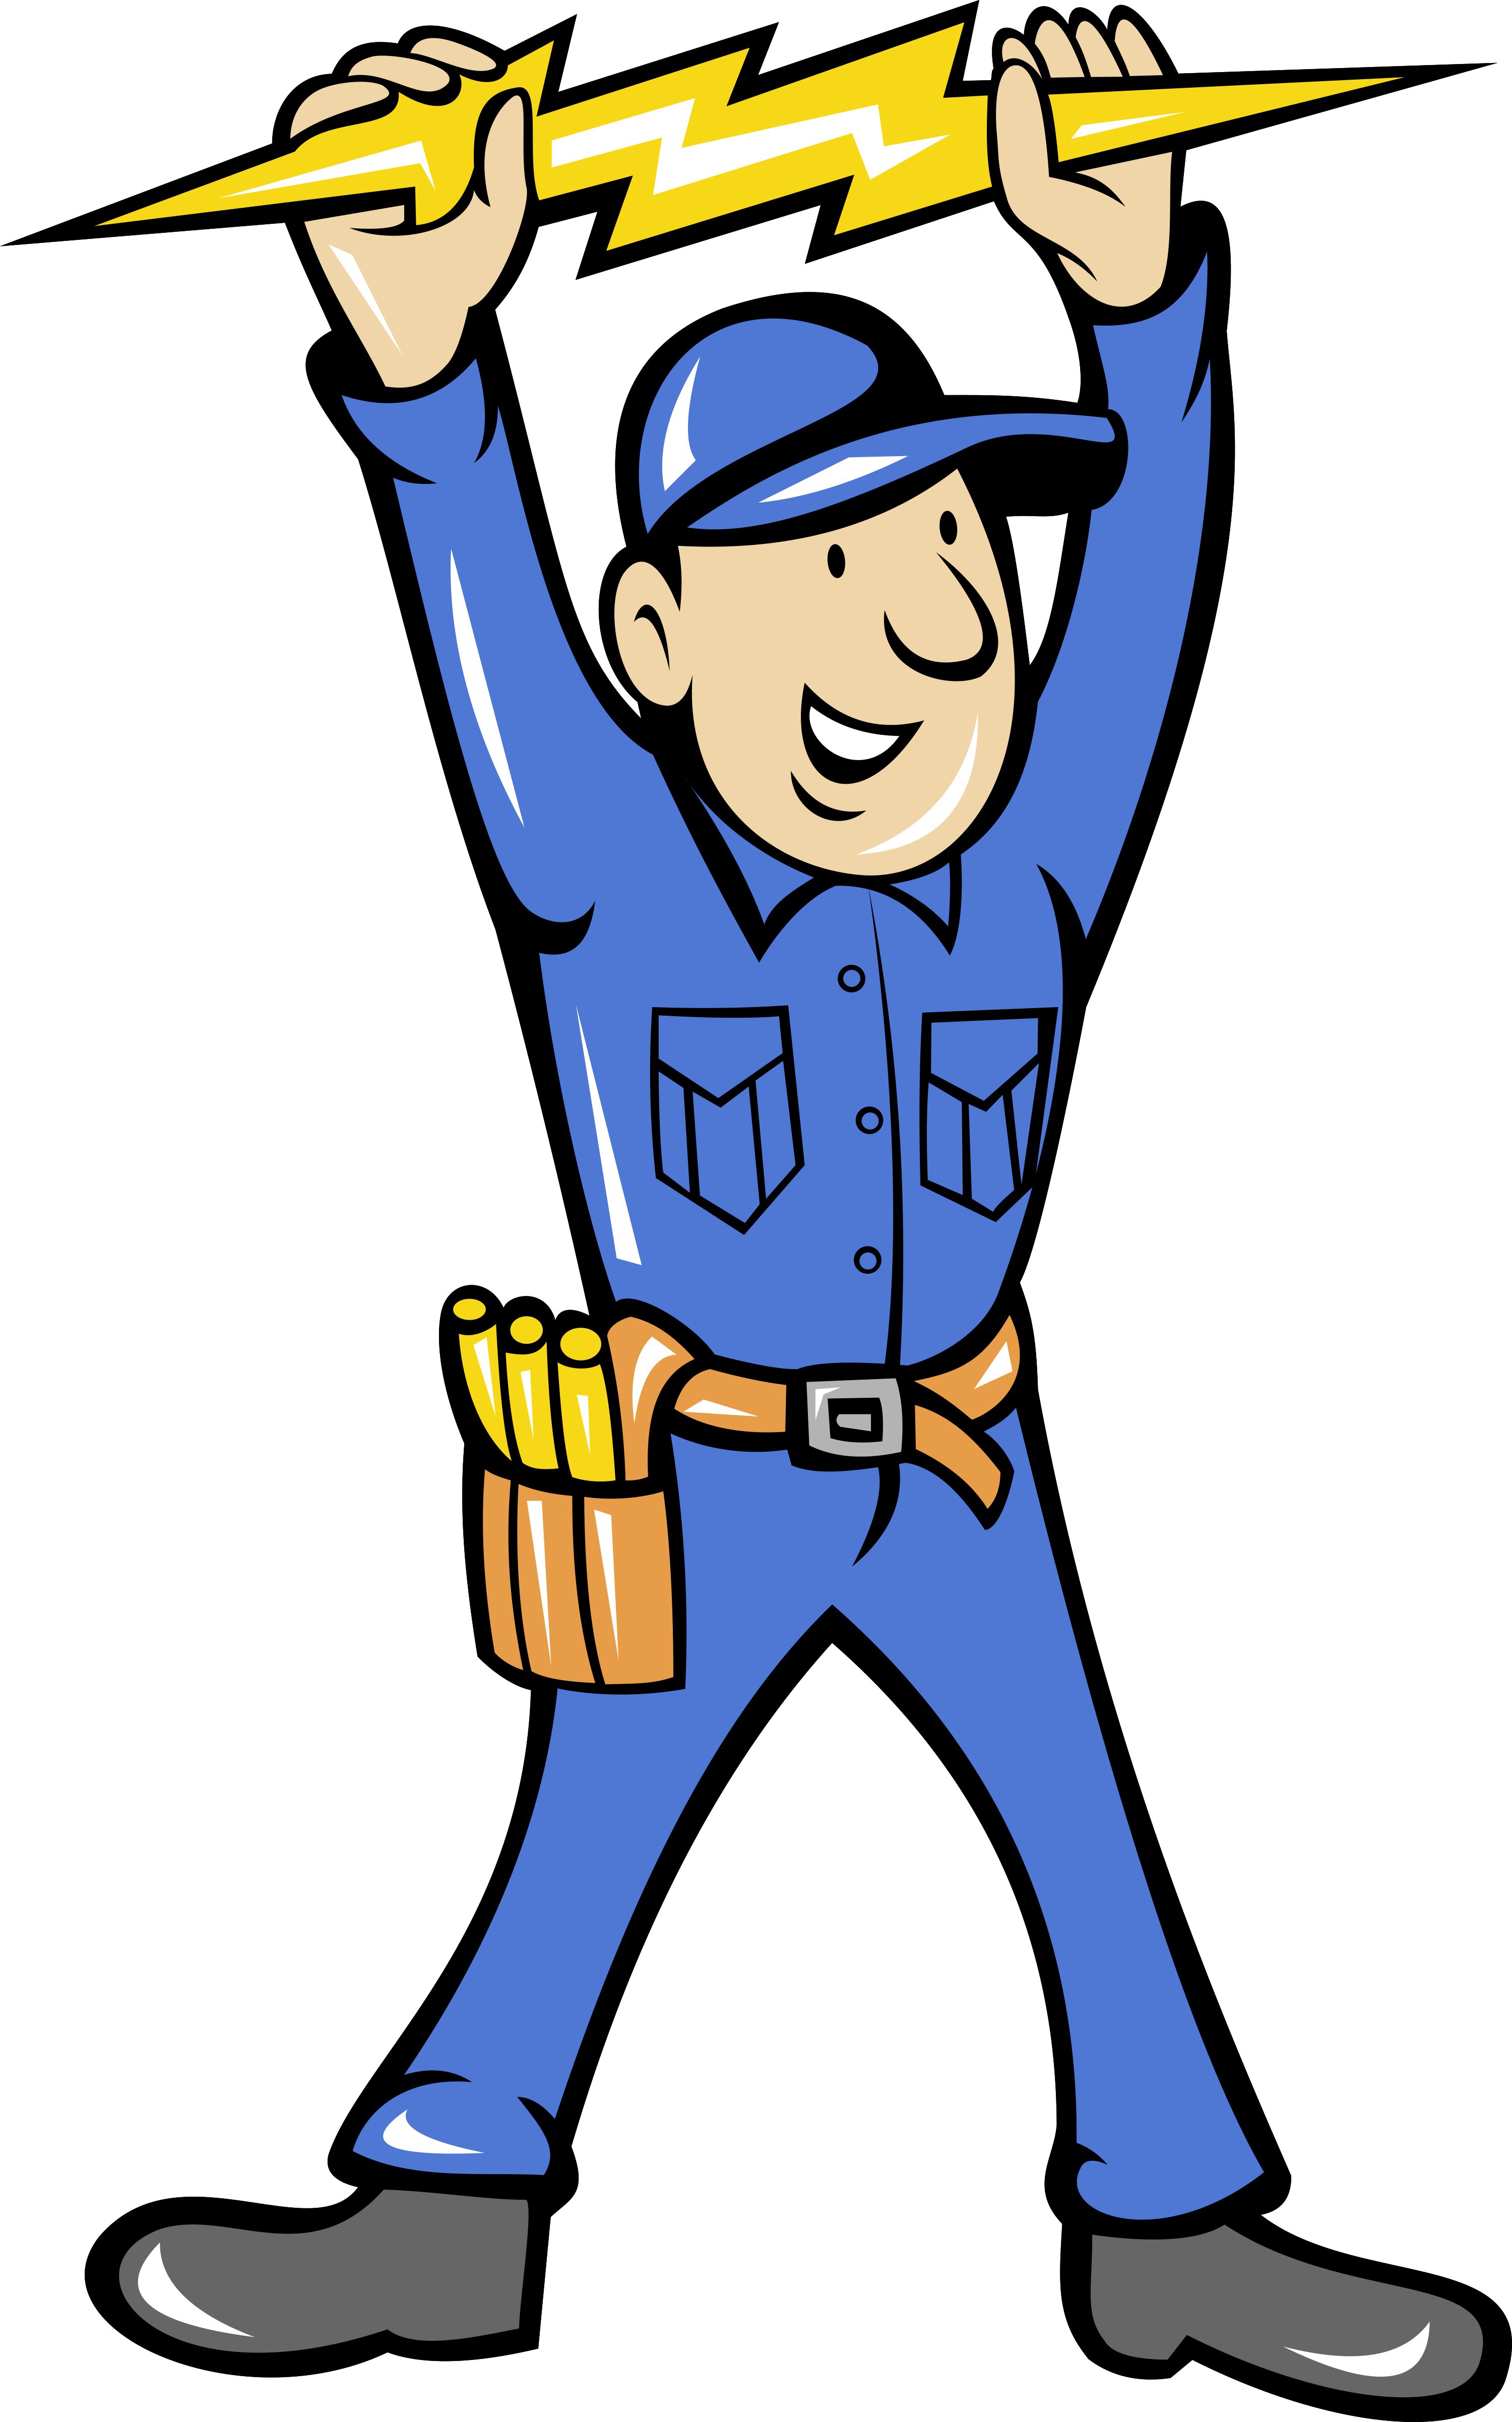 Electricity free download best. Electrical clipart electric man